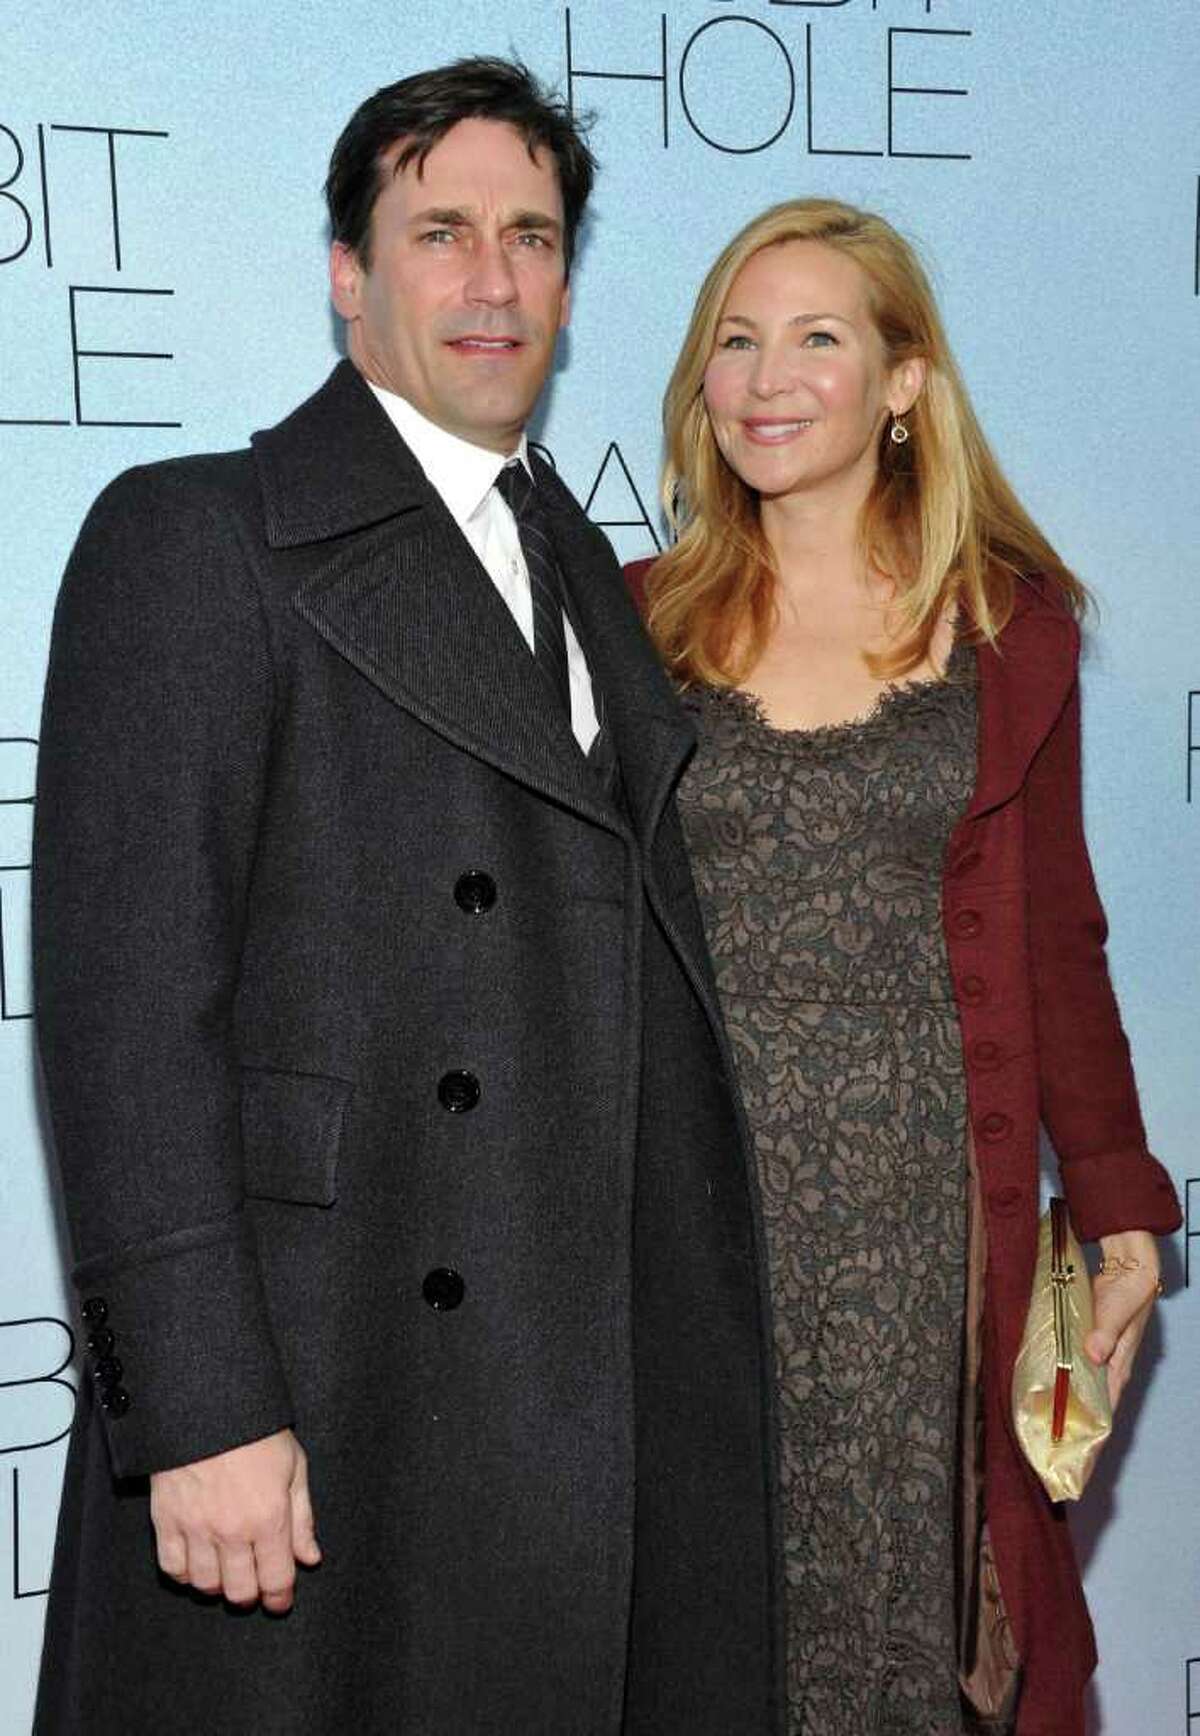 Actor Jon Hamm and actress Jennifer Westfeldt attend the premiere of 'Rabbit Hole' at the Paris Theatre on Thursday, Dec. 2, 2010 in New York. (AP Photo/Evan Agostini)